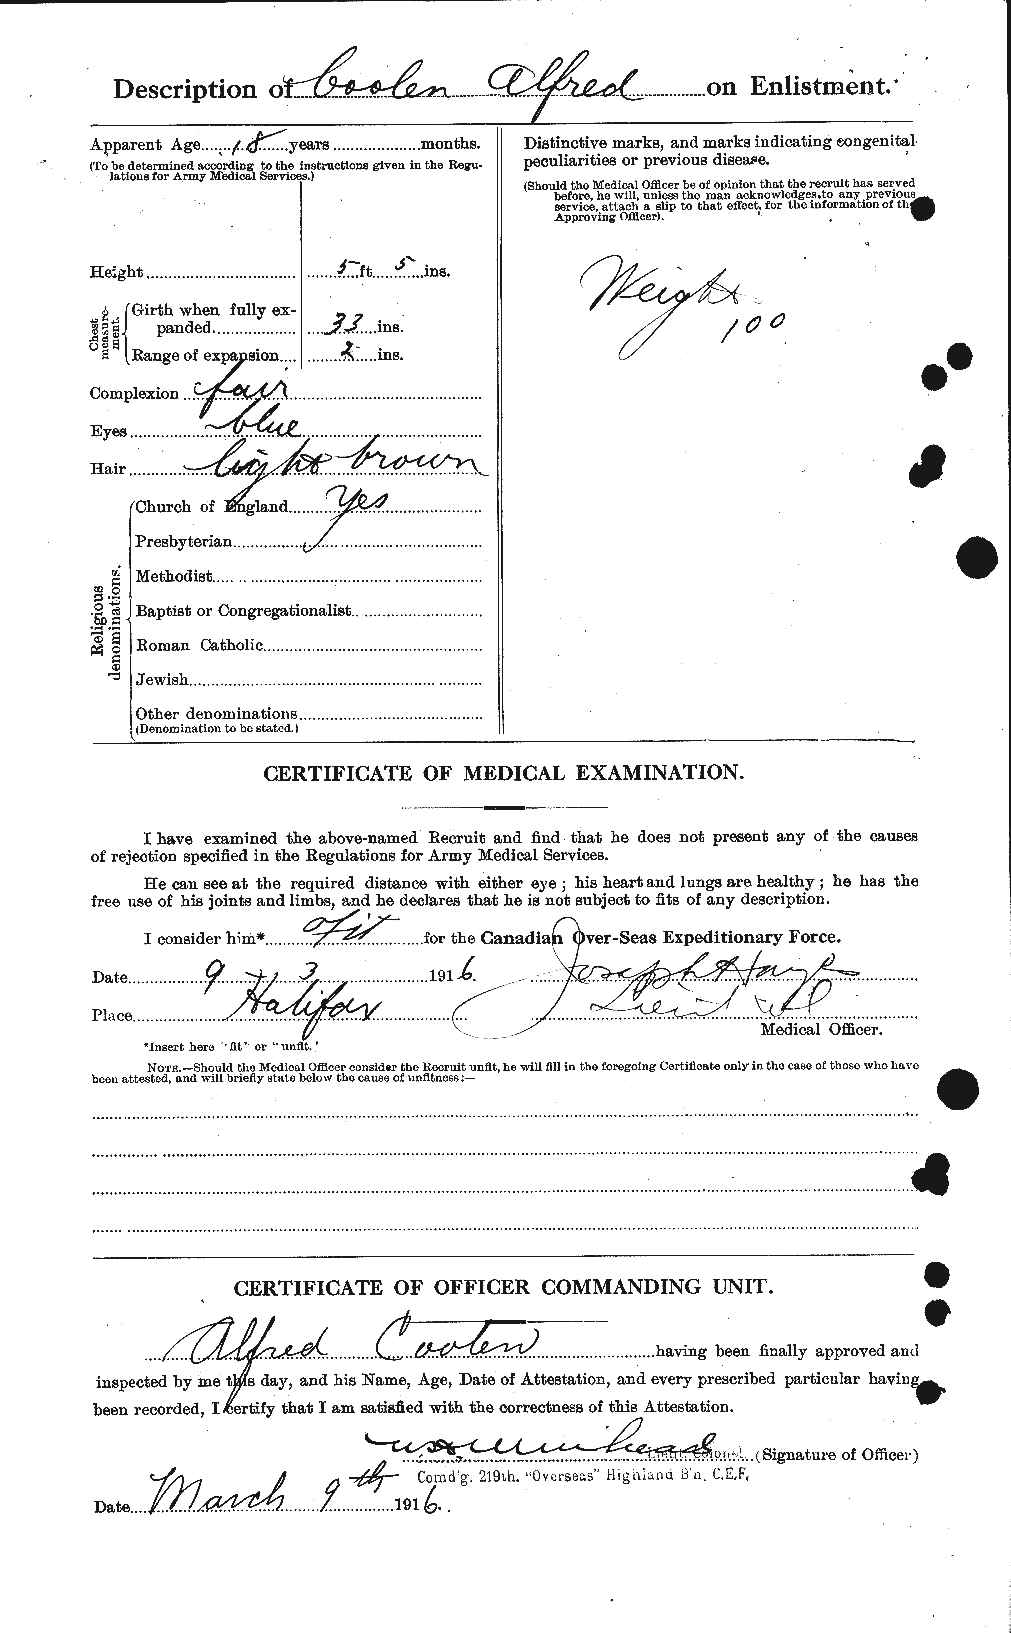 Personnel Records of the First World War - CEF 056338b